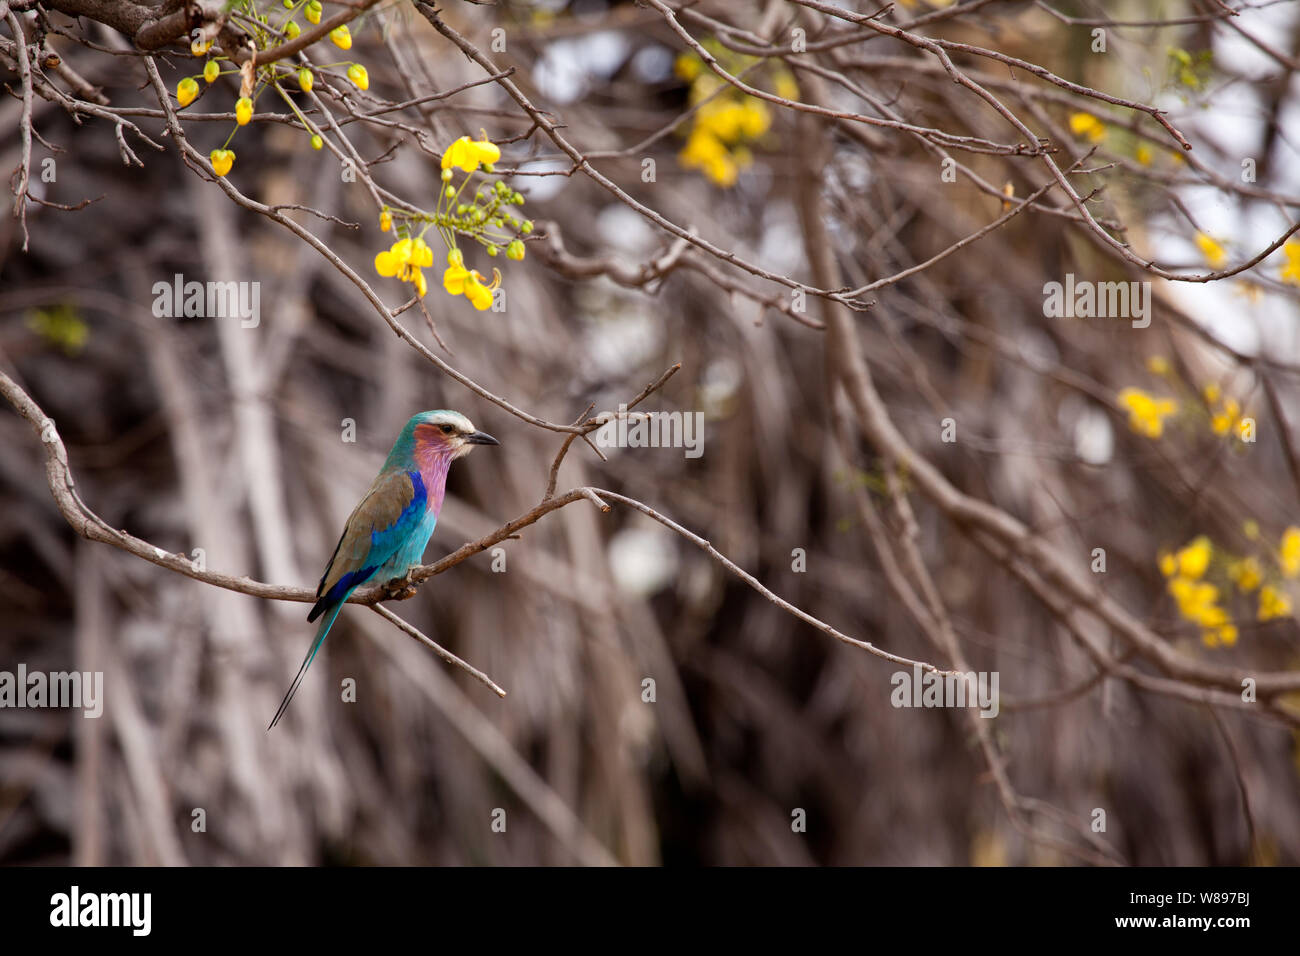 The beautiful lilac breasted roller in a bush, Selous Game Reserve, Tanzania Stock Photo